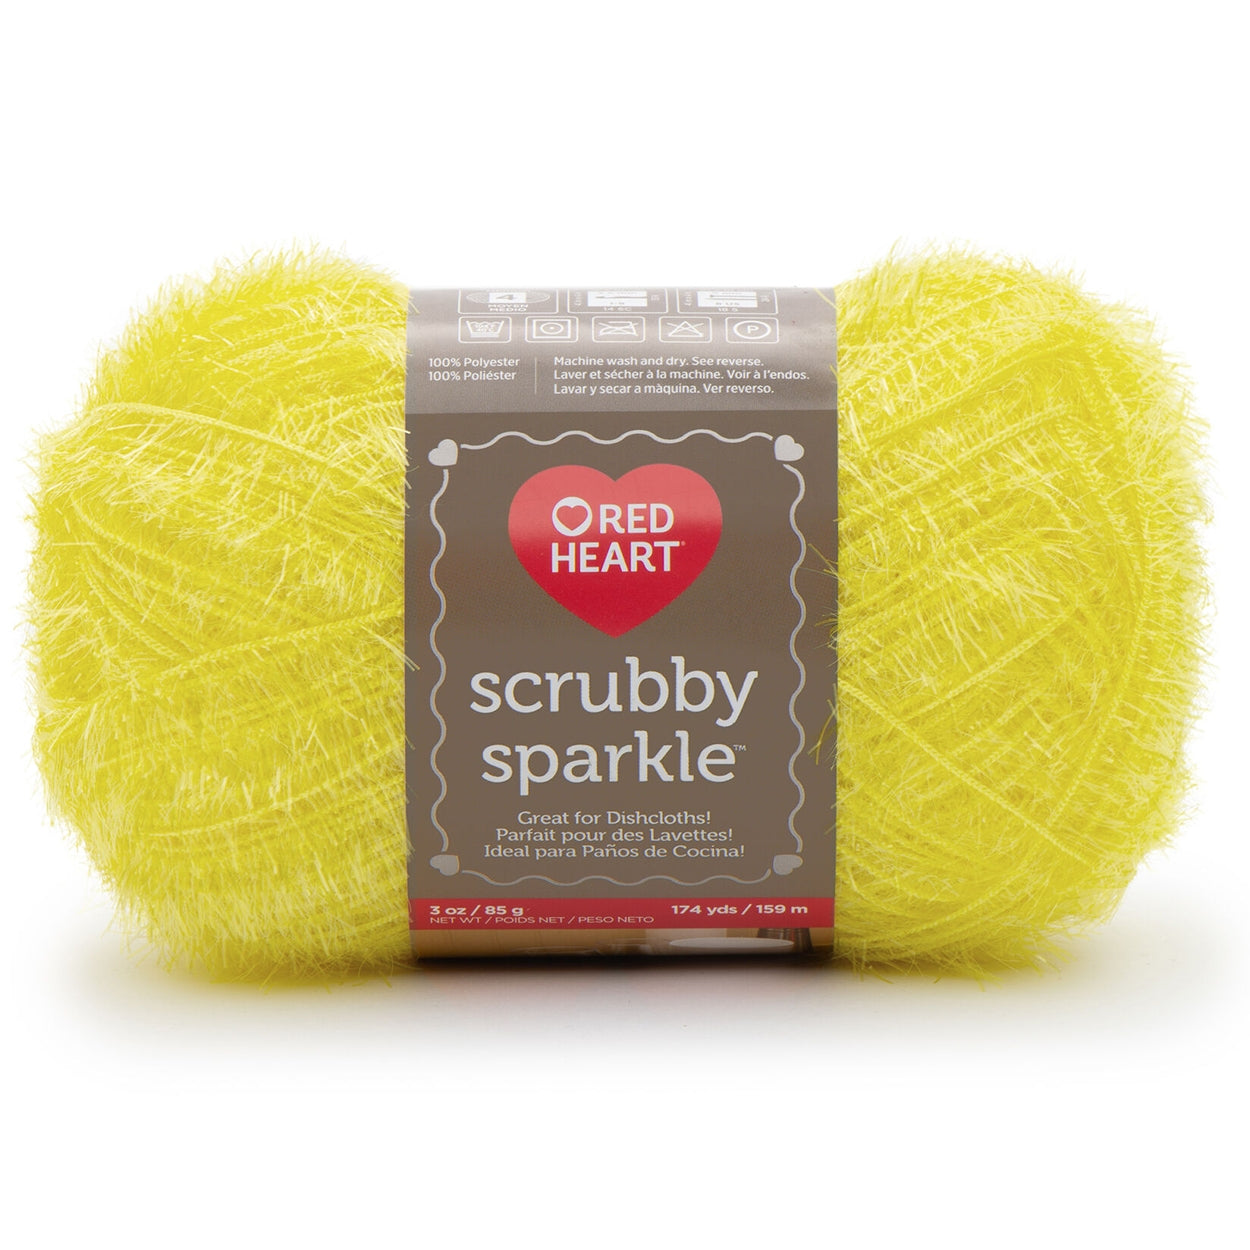 Scrubby Sparkle Yarn from Red Heart, For Quick Drying Washcloths Scrubby Sparkle Yarn from Red Heart Yarn Designers Boutique